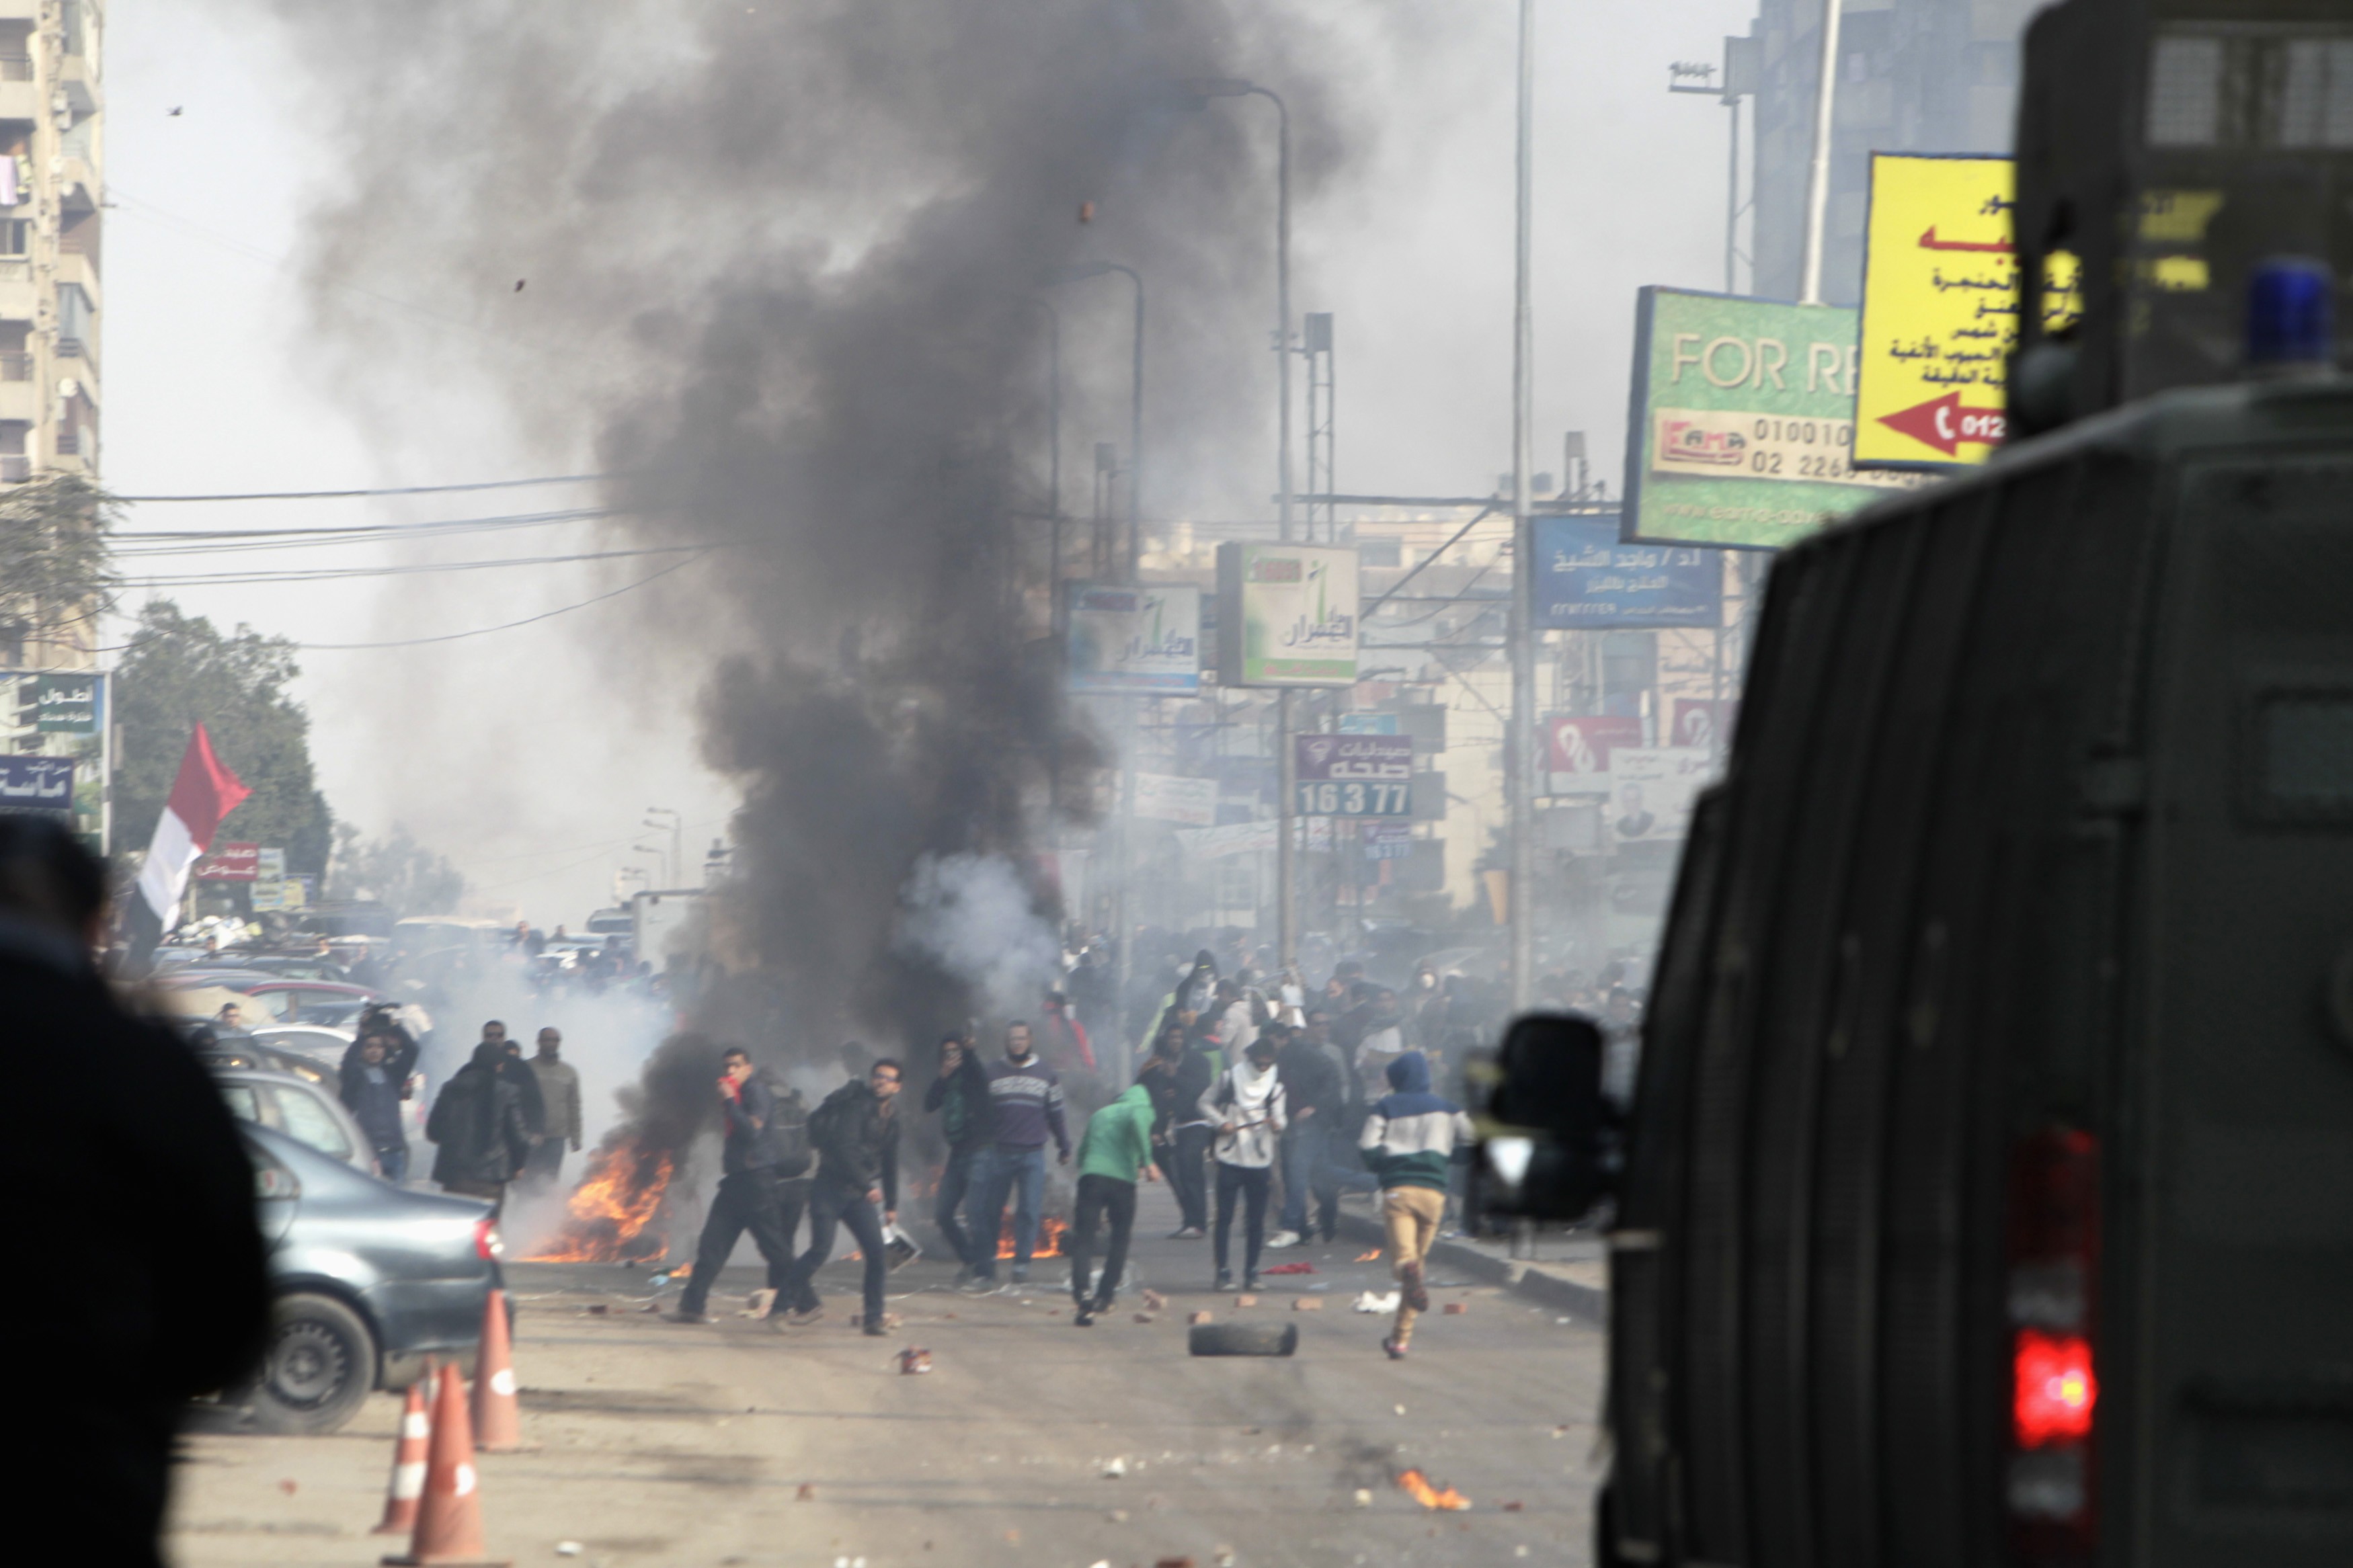 Supporters of ousted president clash with security forces in Cairo